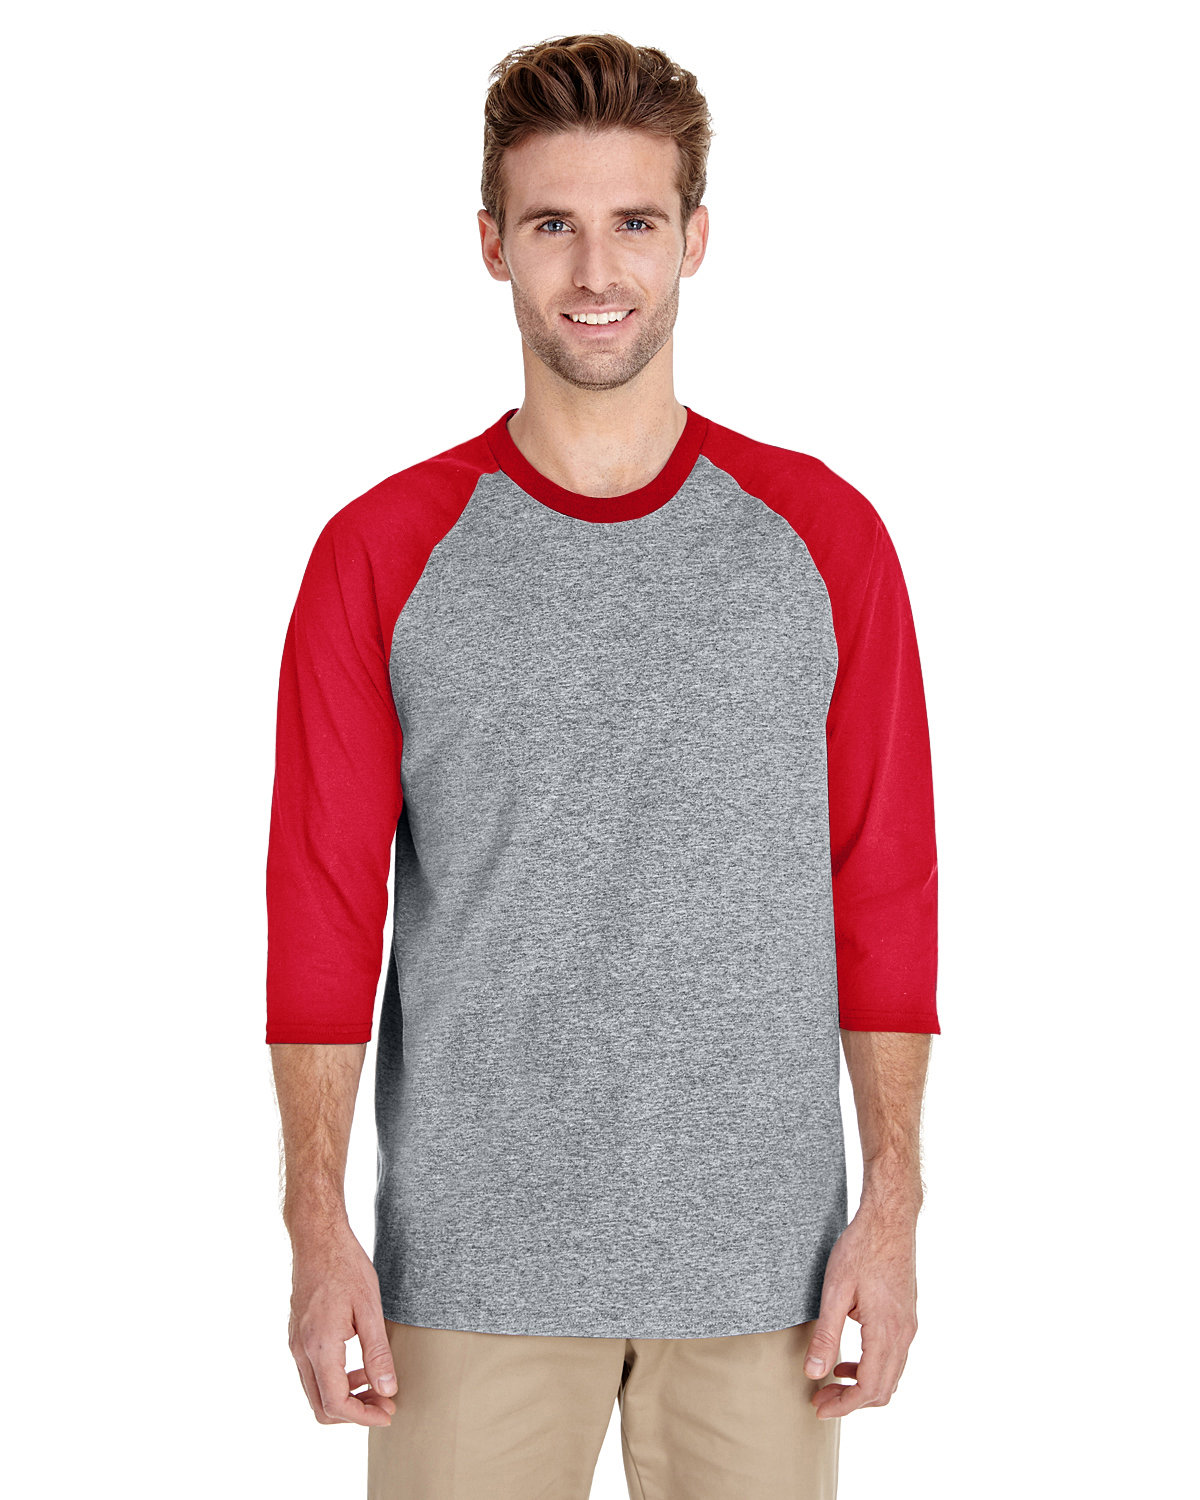 grey and red baseball jersey